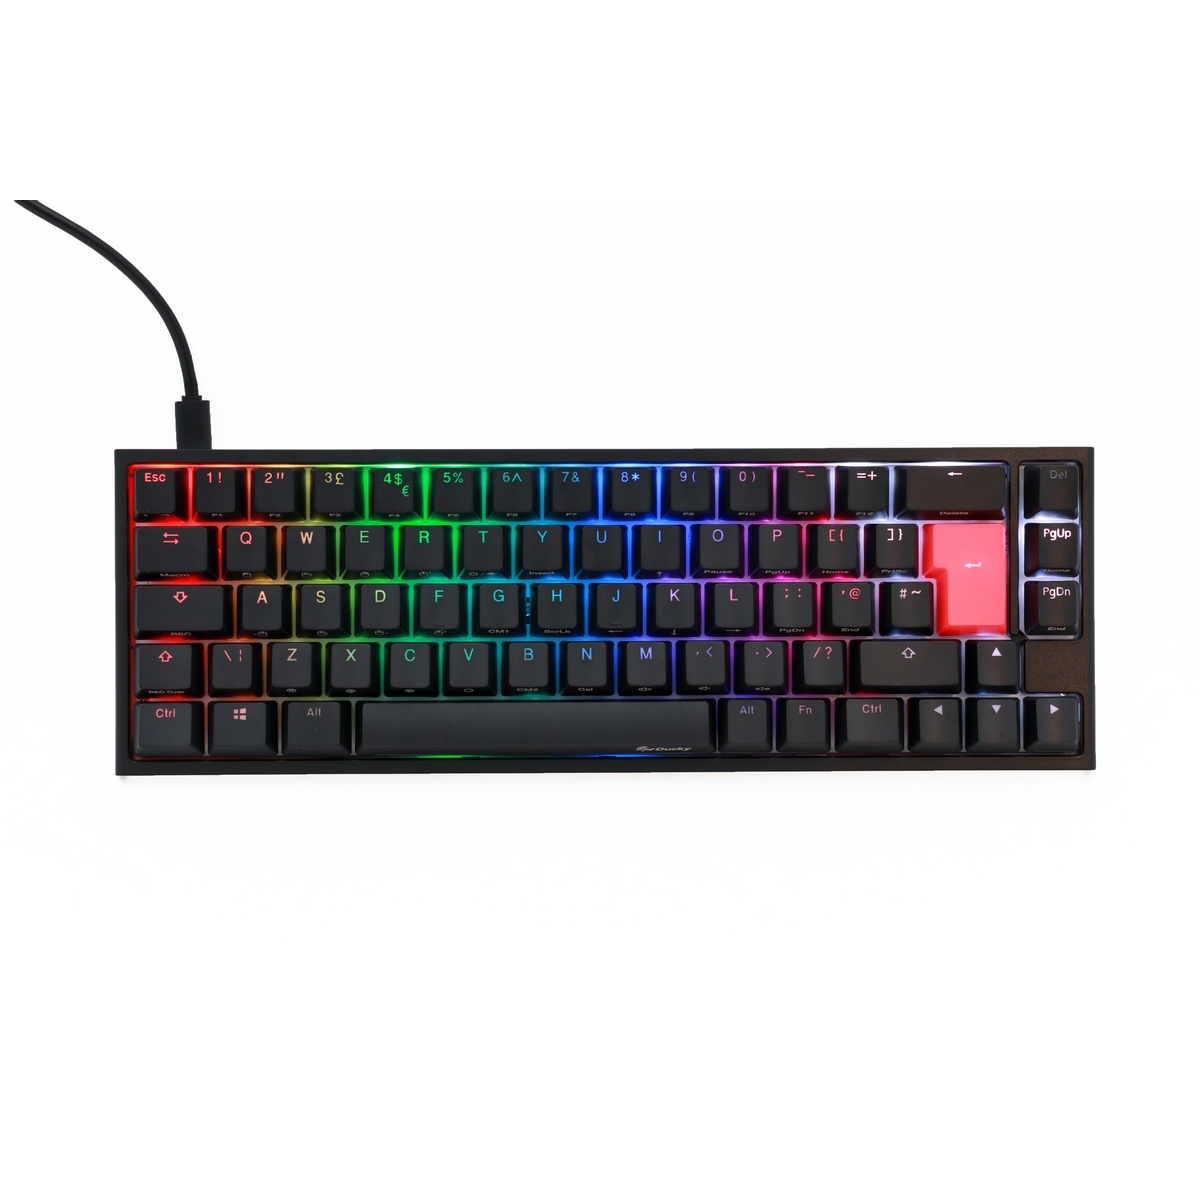 Ducky - Ducky One 2 SF 65% RGB Backlit Speed Silver Cherry MX Switch USB Mechanical Gaming Keyboard UK Layout